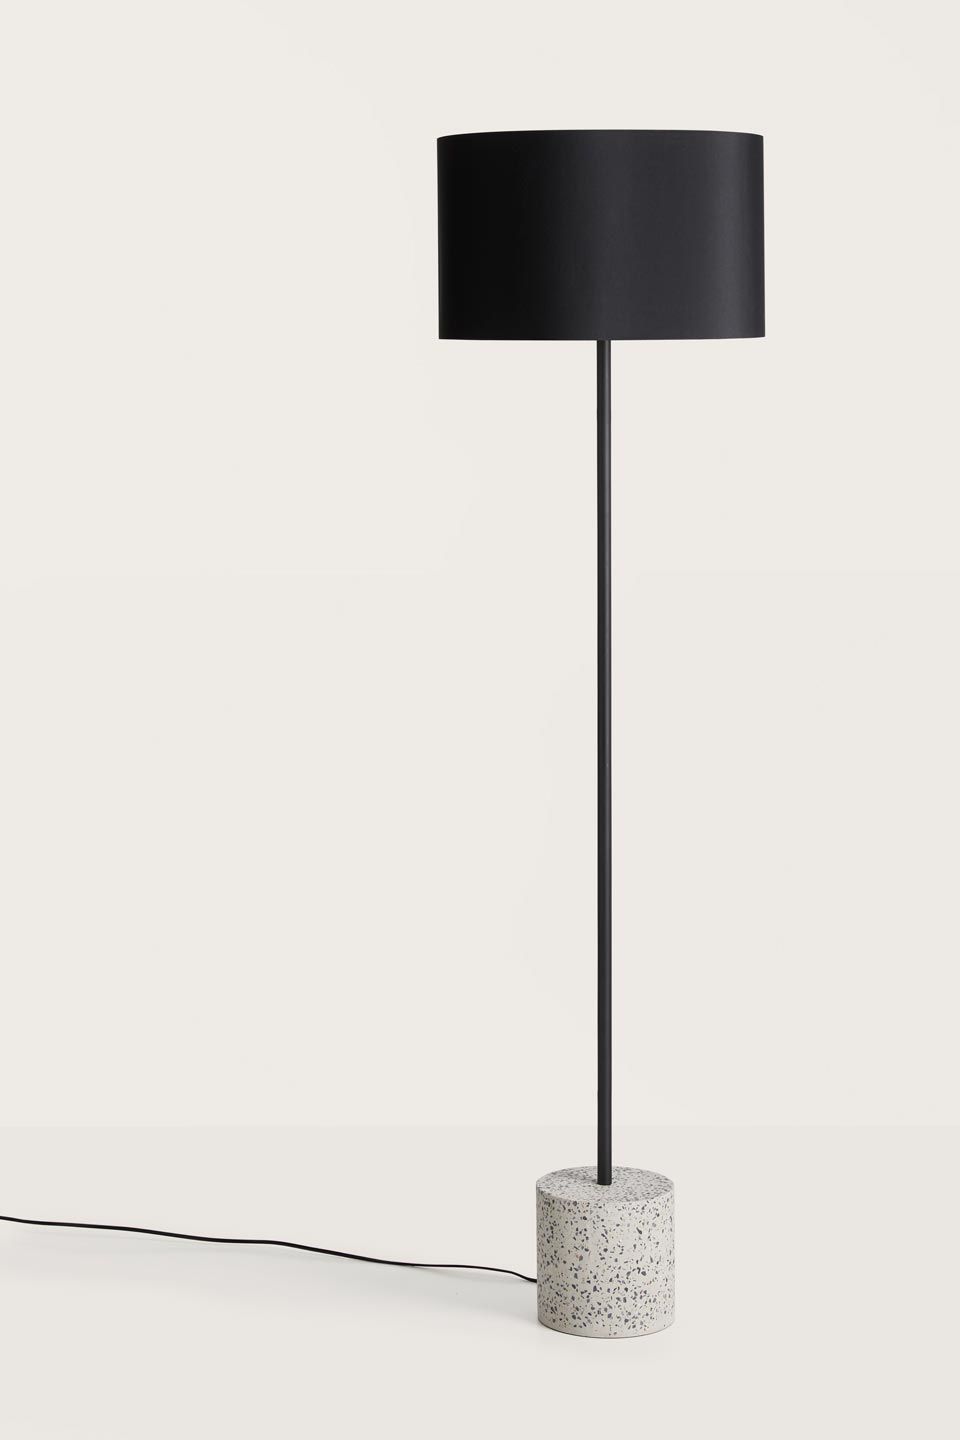 2019 Minimalist Standing Lamps For Ito Floor Lamp With Terrazzo Base  Aromas, Contemporary Lighting – Réf (View 13 of 15)